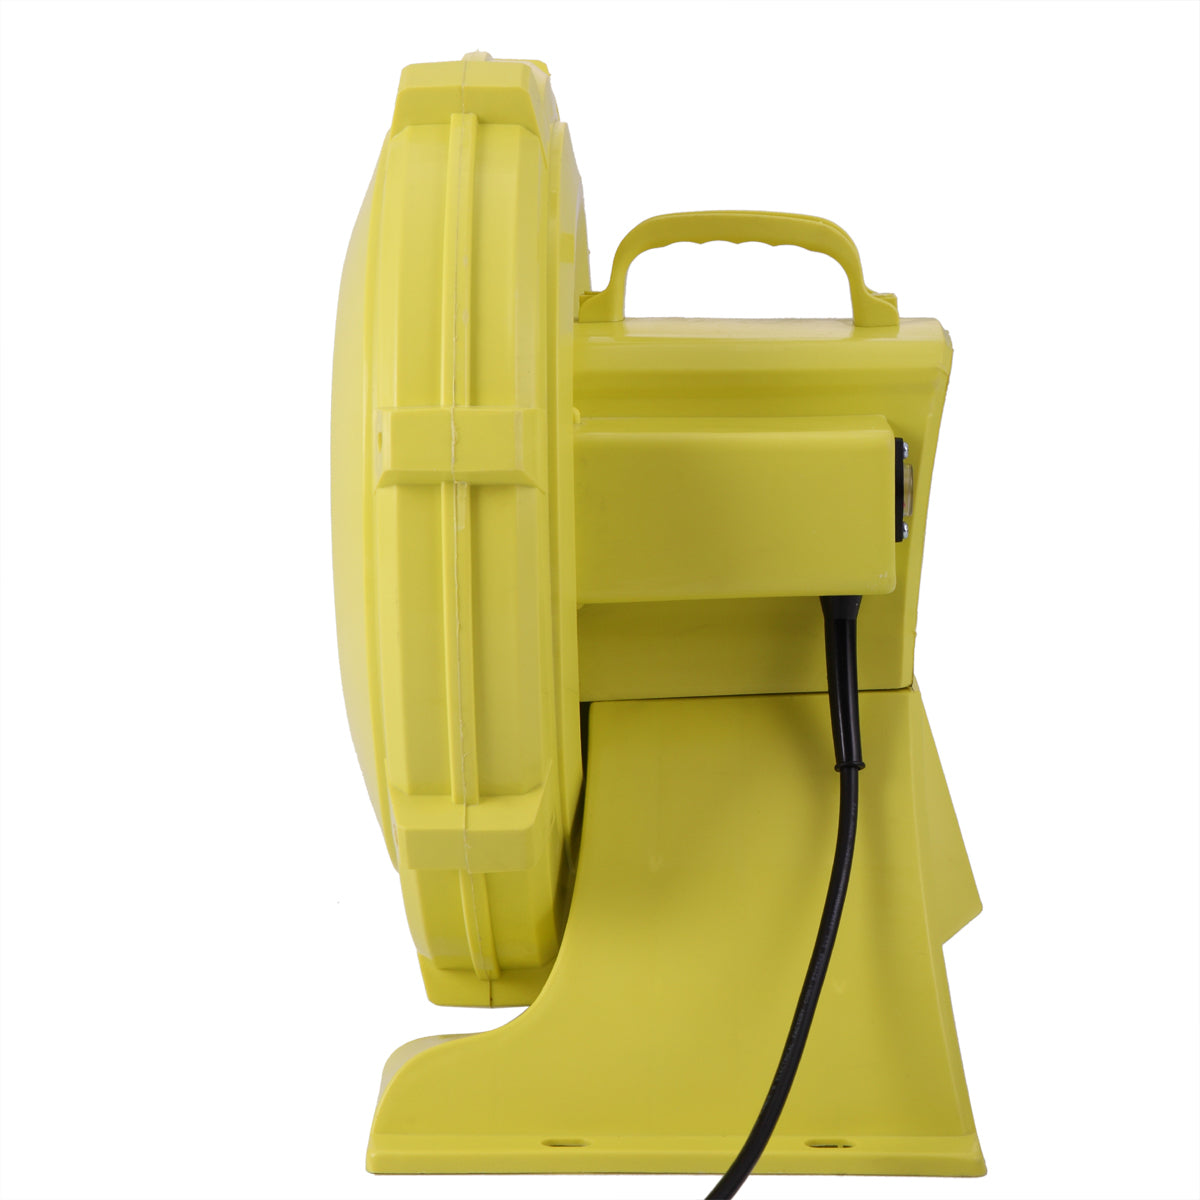 Powerful 680W Outdoor Indoor Electric Air Blower Bump yellow-iron